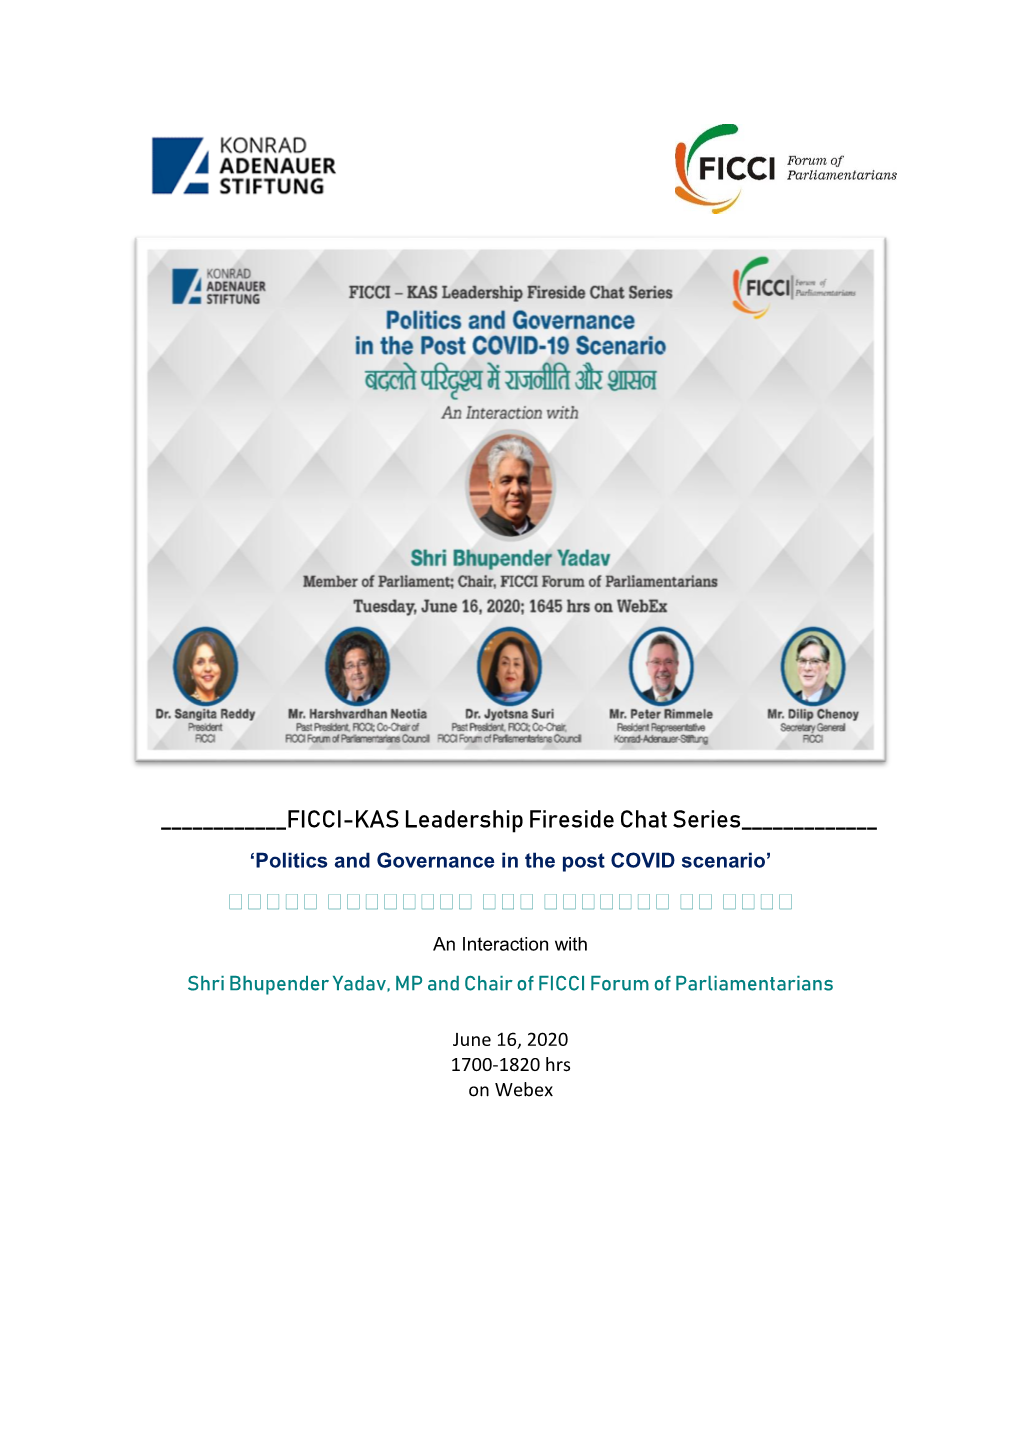 FICCI-KAS Leadership Fireside Chat Series______‘Politics and Governance in the Post COVID Scenario’ बबबबब बबबबबबबब बबब बबबबबबब बब बबबब